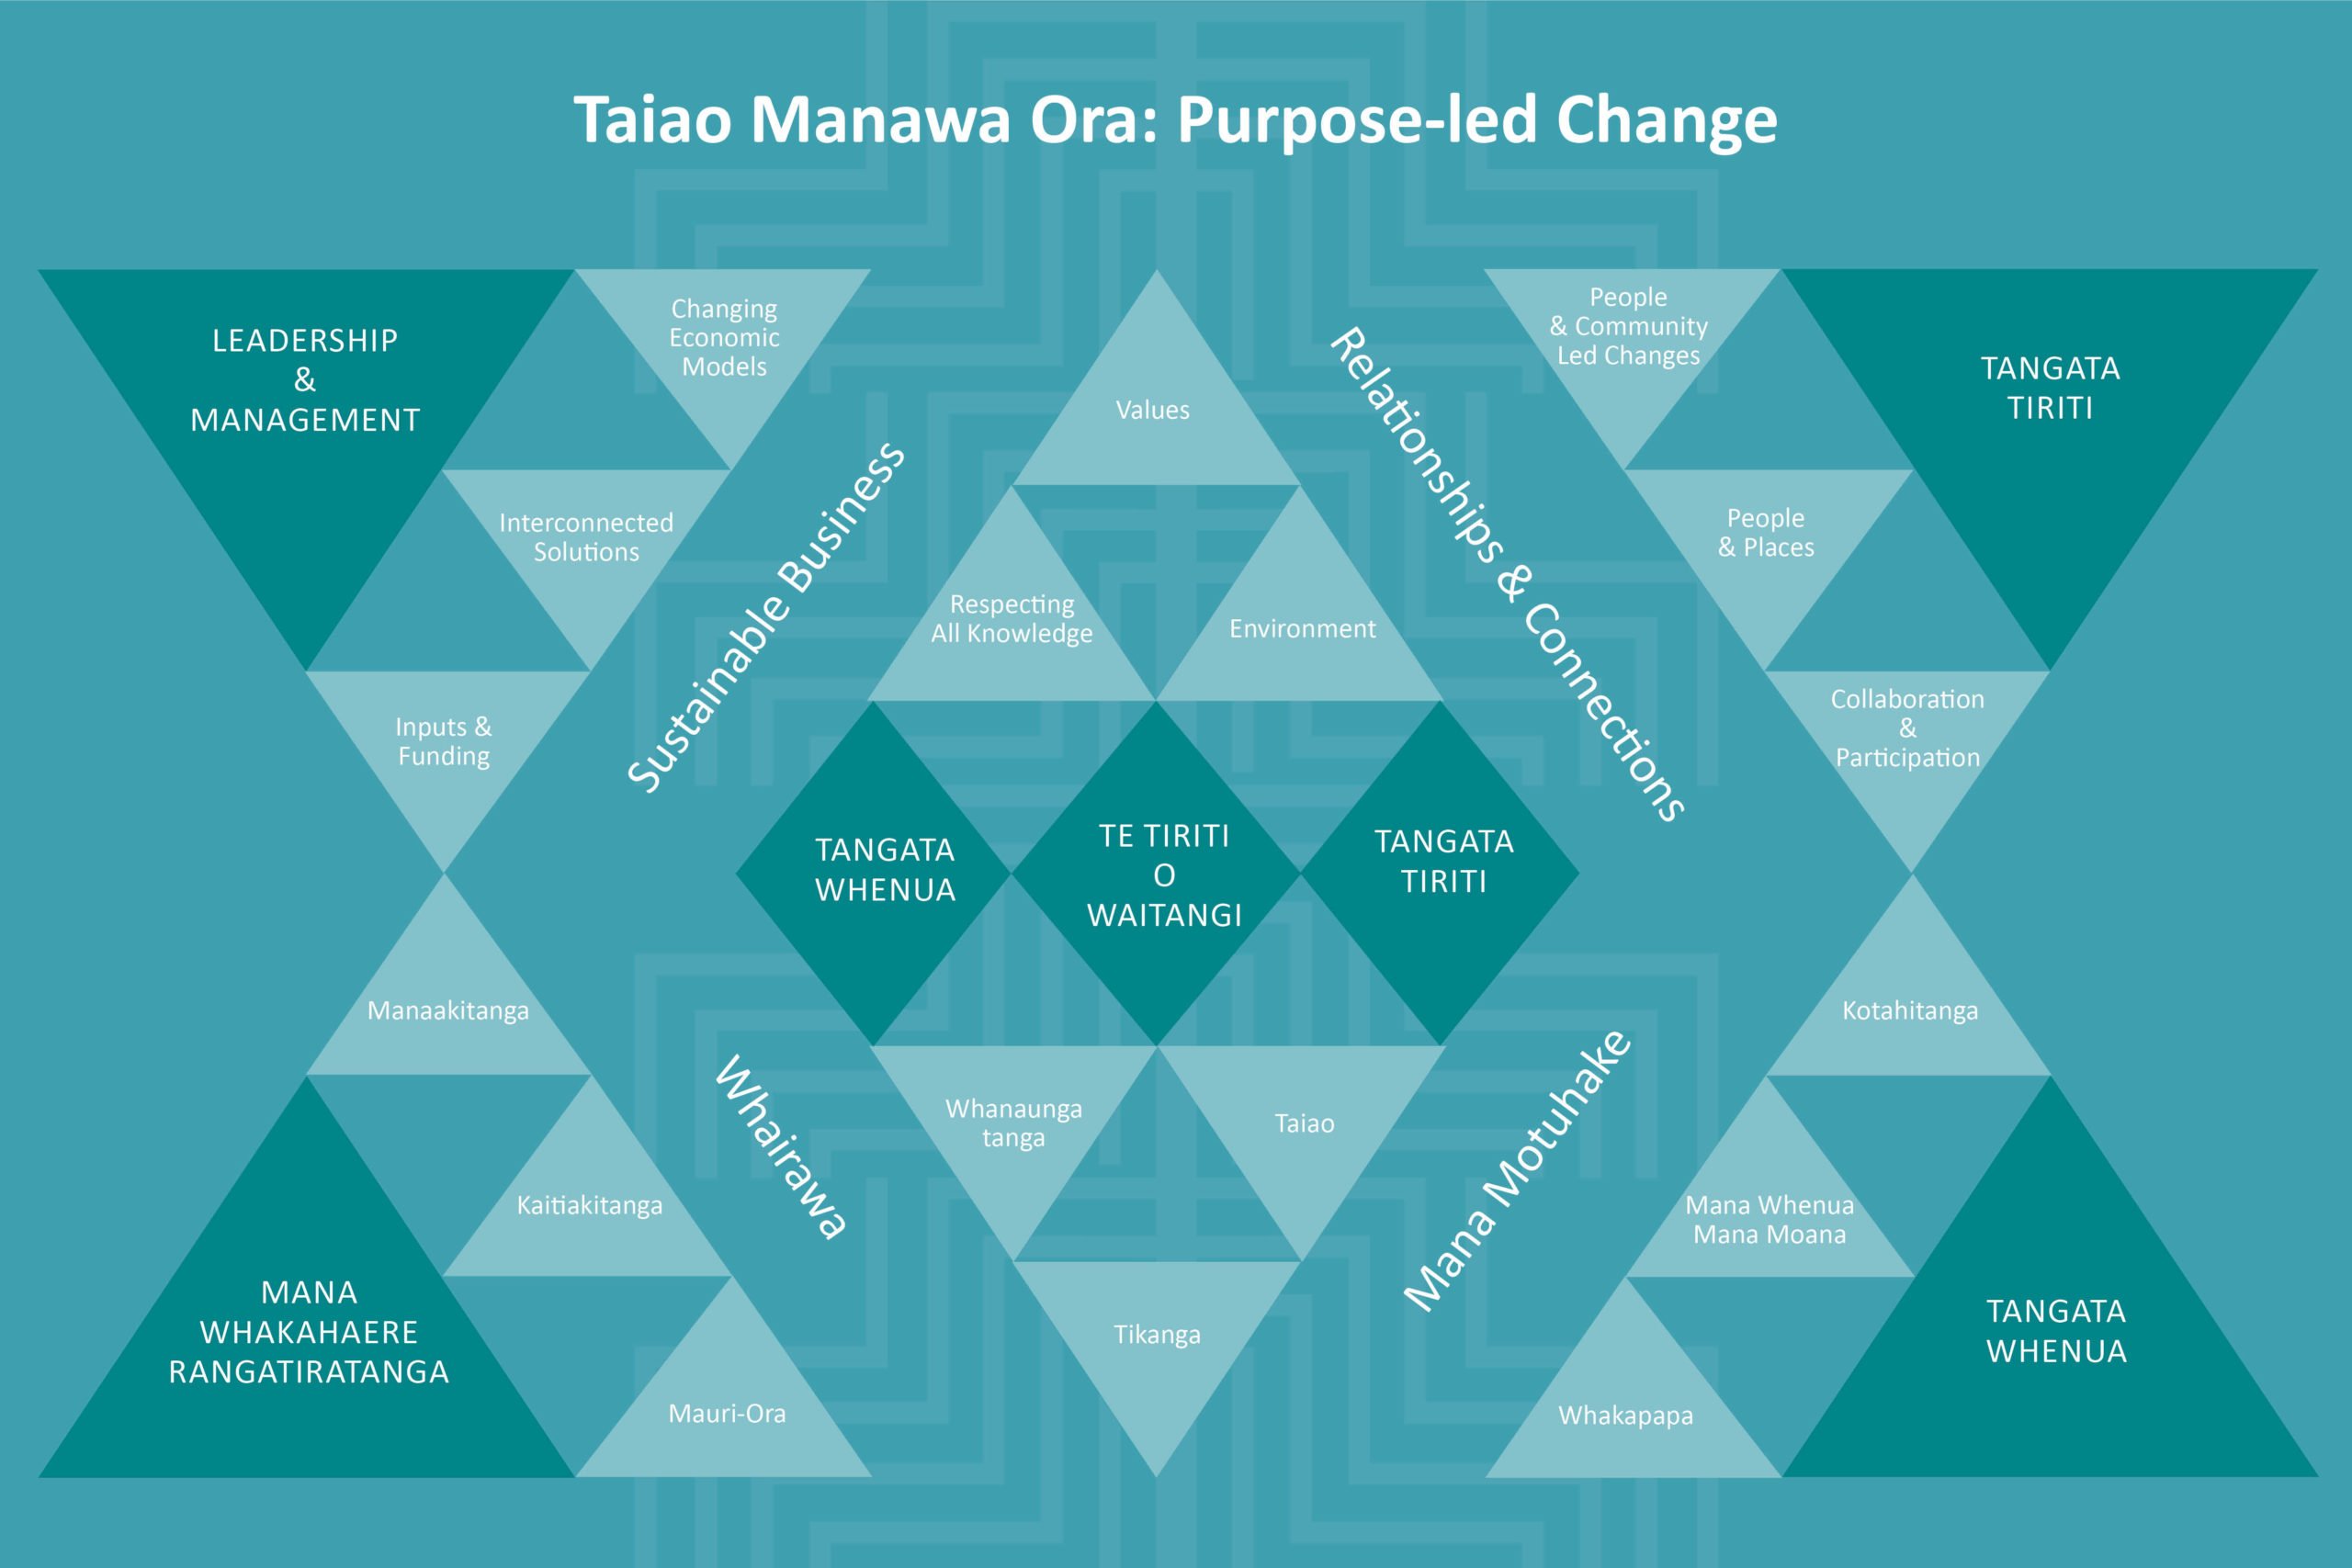 This model (Taiao Manawa Ora: Purpose-led Change) guides the Revitalise te Taiao research programme. Te Tiriti o Waitangi and the relationship and connection between tangata whenua and tangata Tiriti are at the center. The central patiki (diamond) illustrates the inter-relationship of values, knowledge, and worldviews of tangata whenua and tangata Tiriti. The outer ‘wings’ highlight the differences. While recognising this difference, these principles also share a high level of connectedness across cultures to gather and share information on the social, ecological, and cultural context of the three pilots as they move along their Te Taiao pathway.